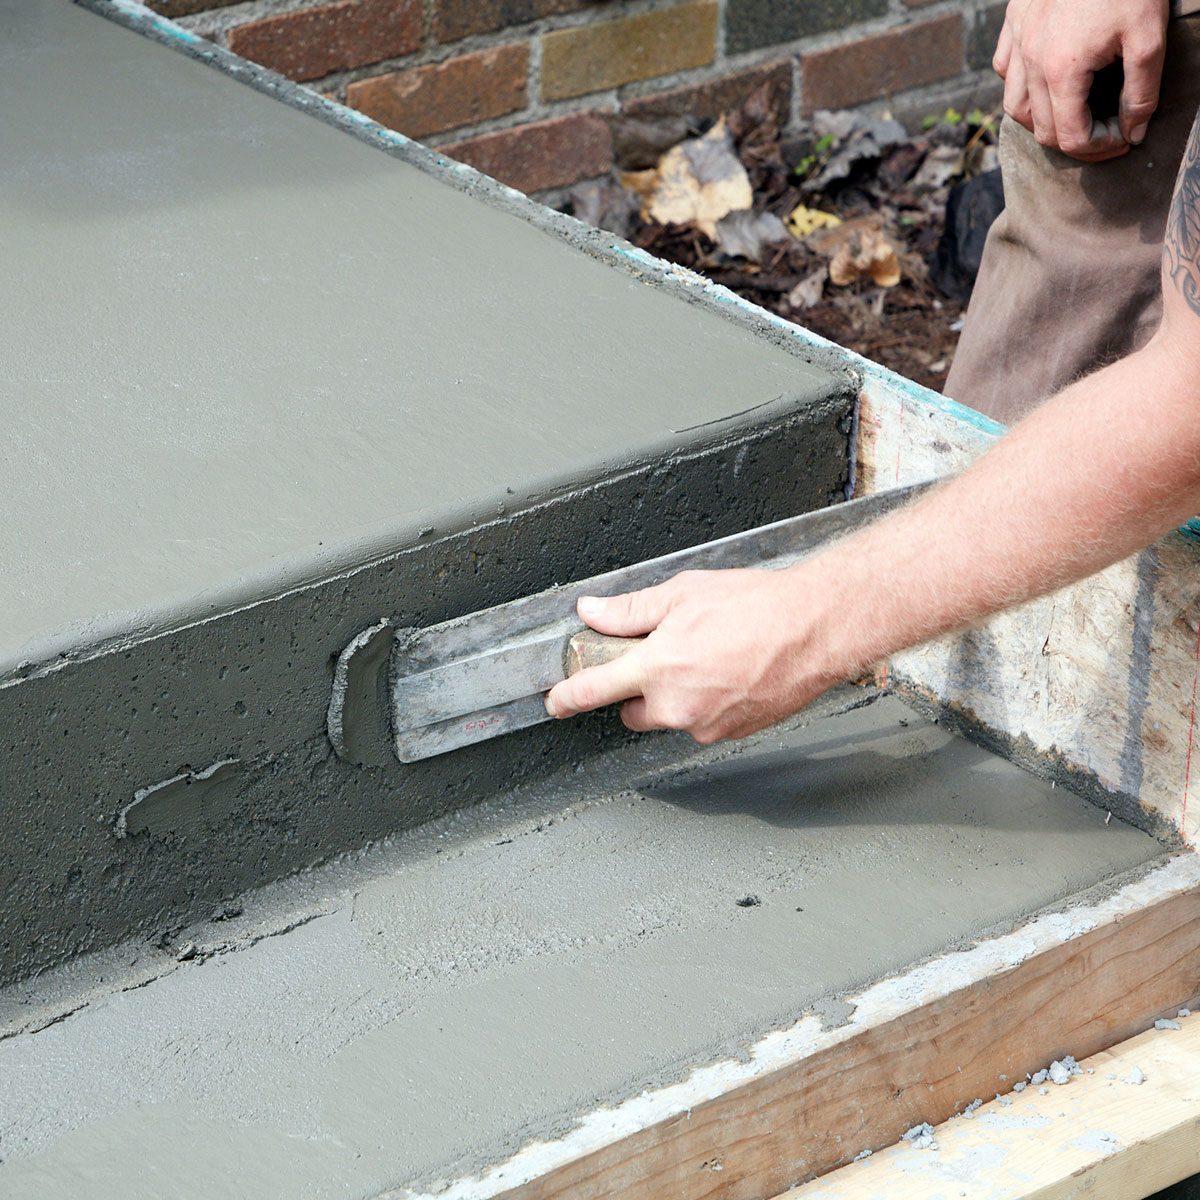 Fill any voids with leftover concrete | Construction Pro Tips